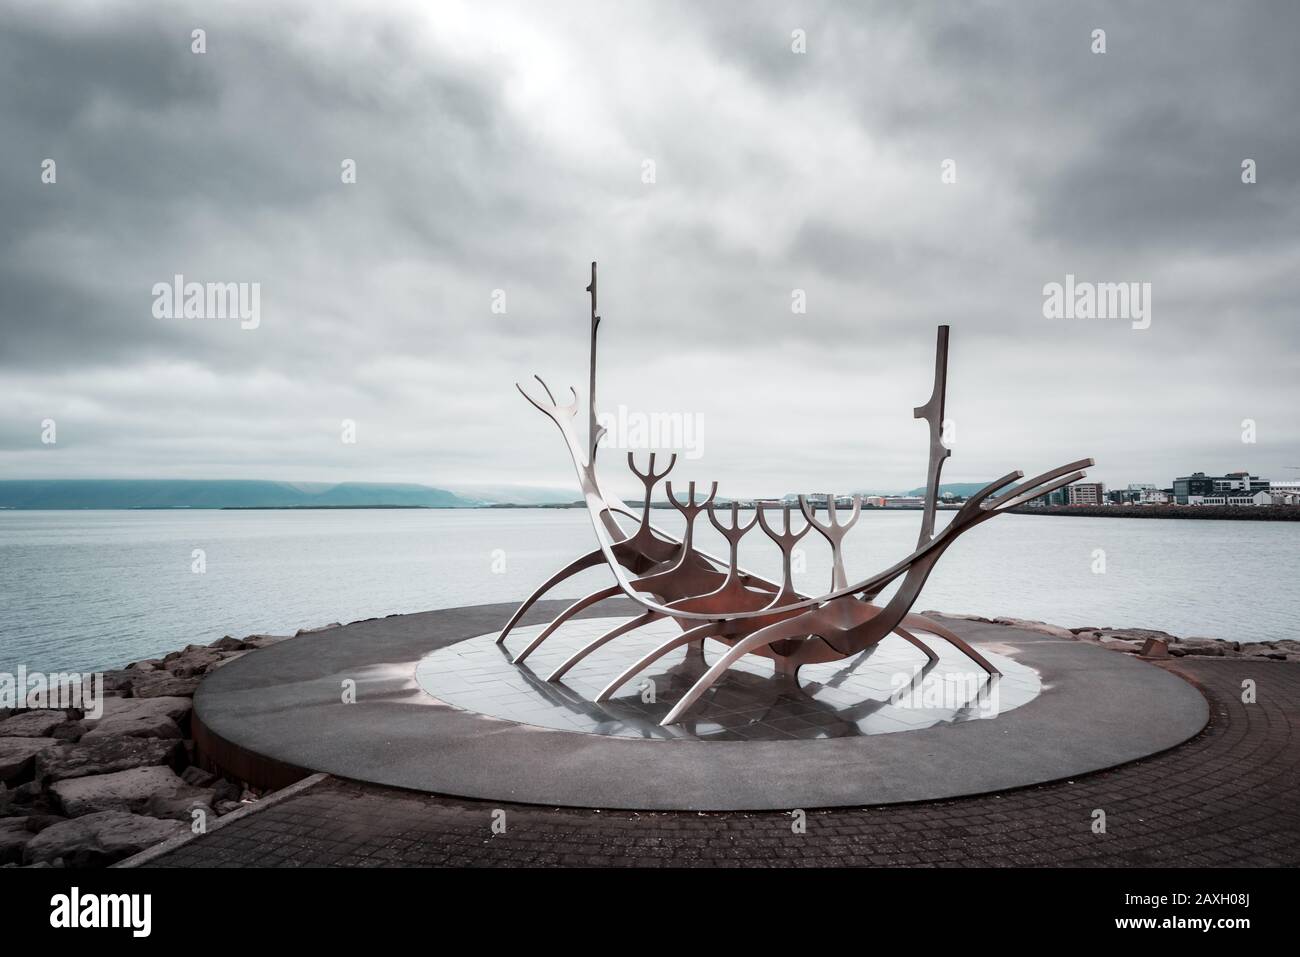 Cityscape with famous solfar ship sculpture in Reykjavik, Iceland Stock Photo